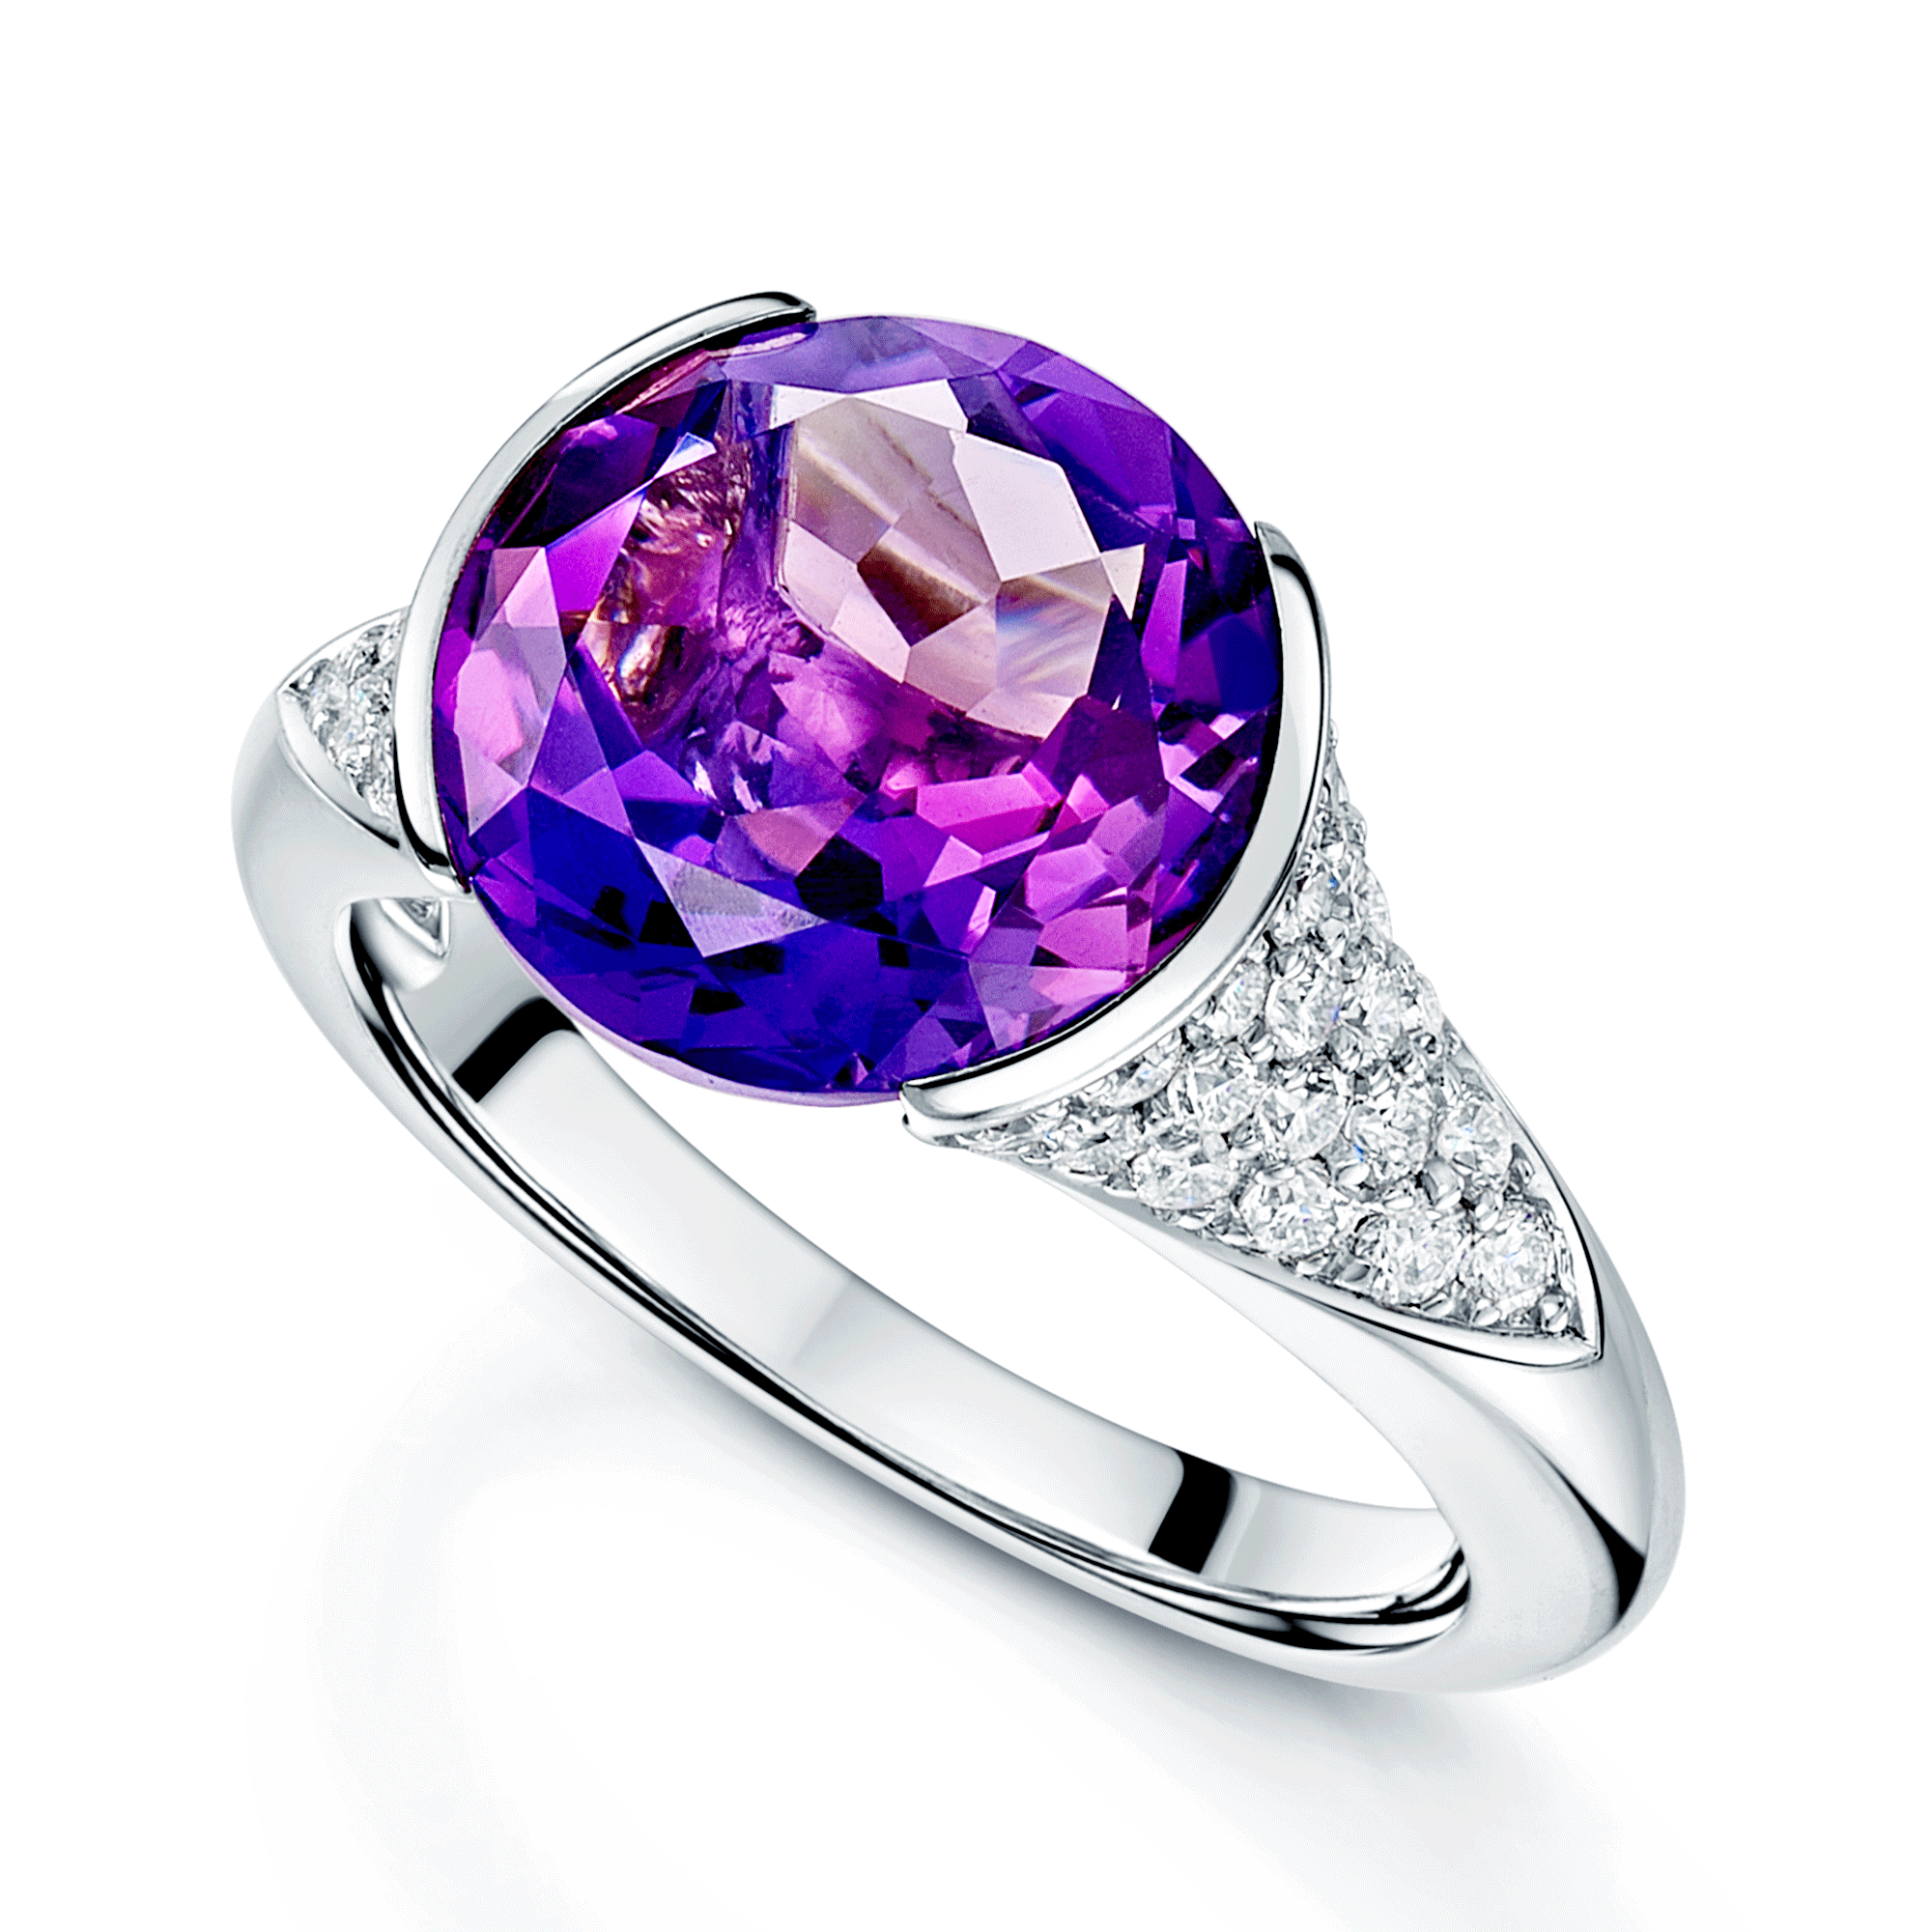 18ct White Gold Amethyst And Diamond Pave Set Dress Ring